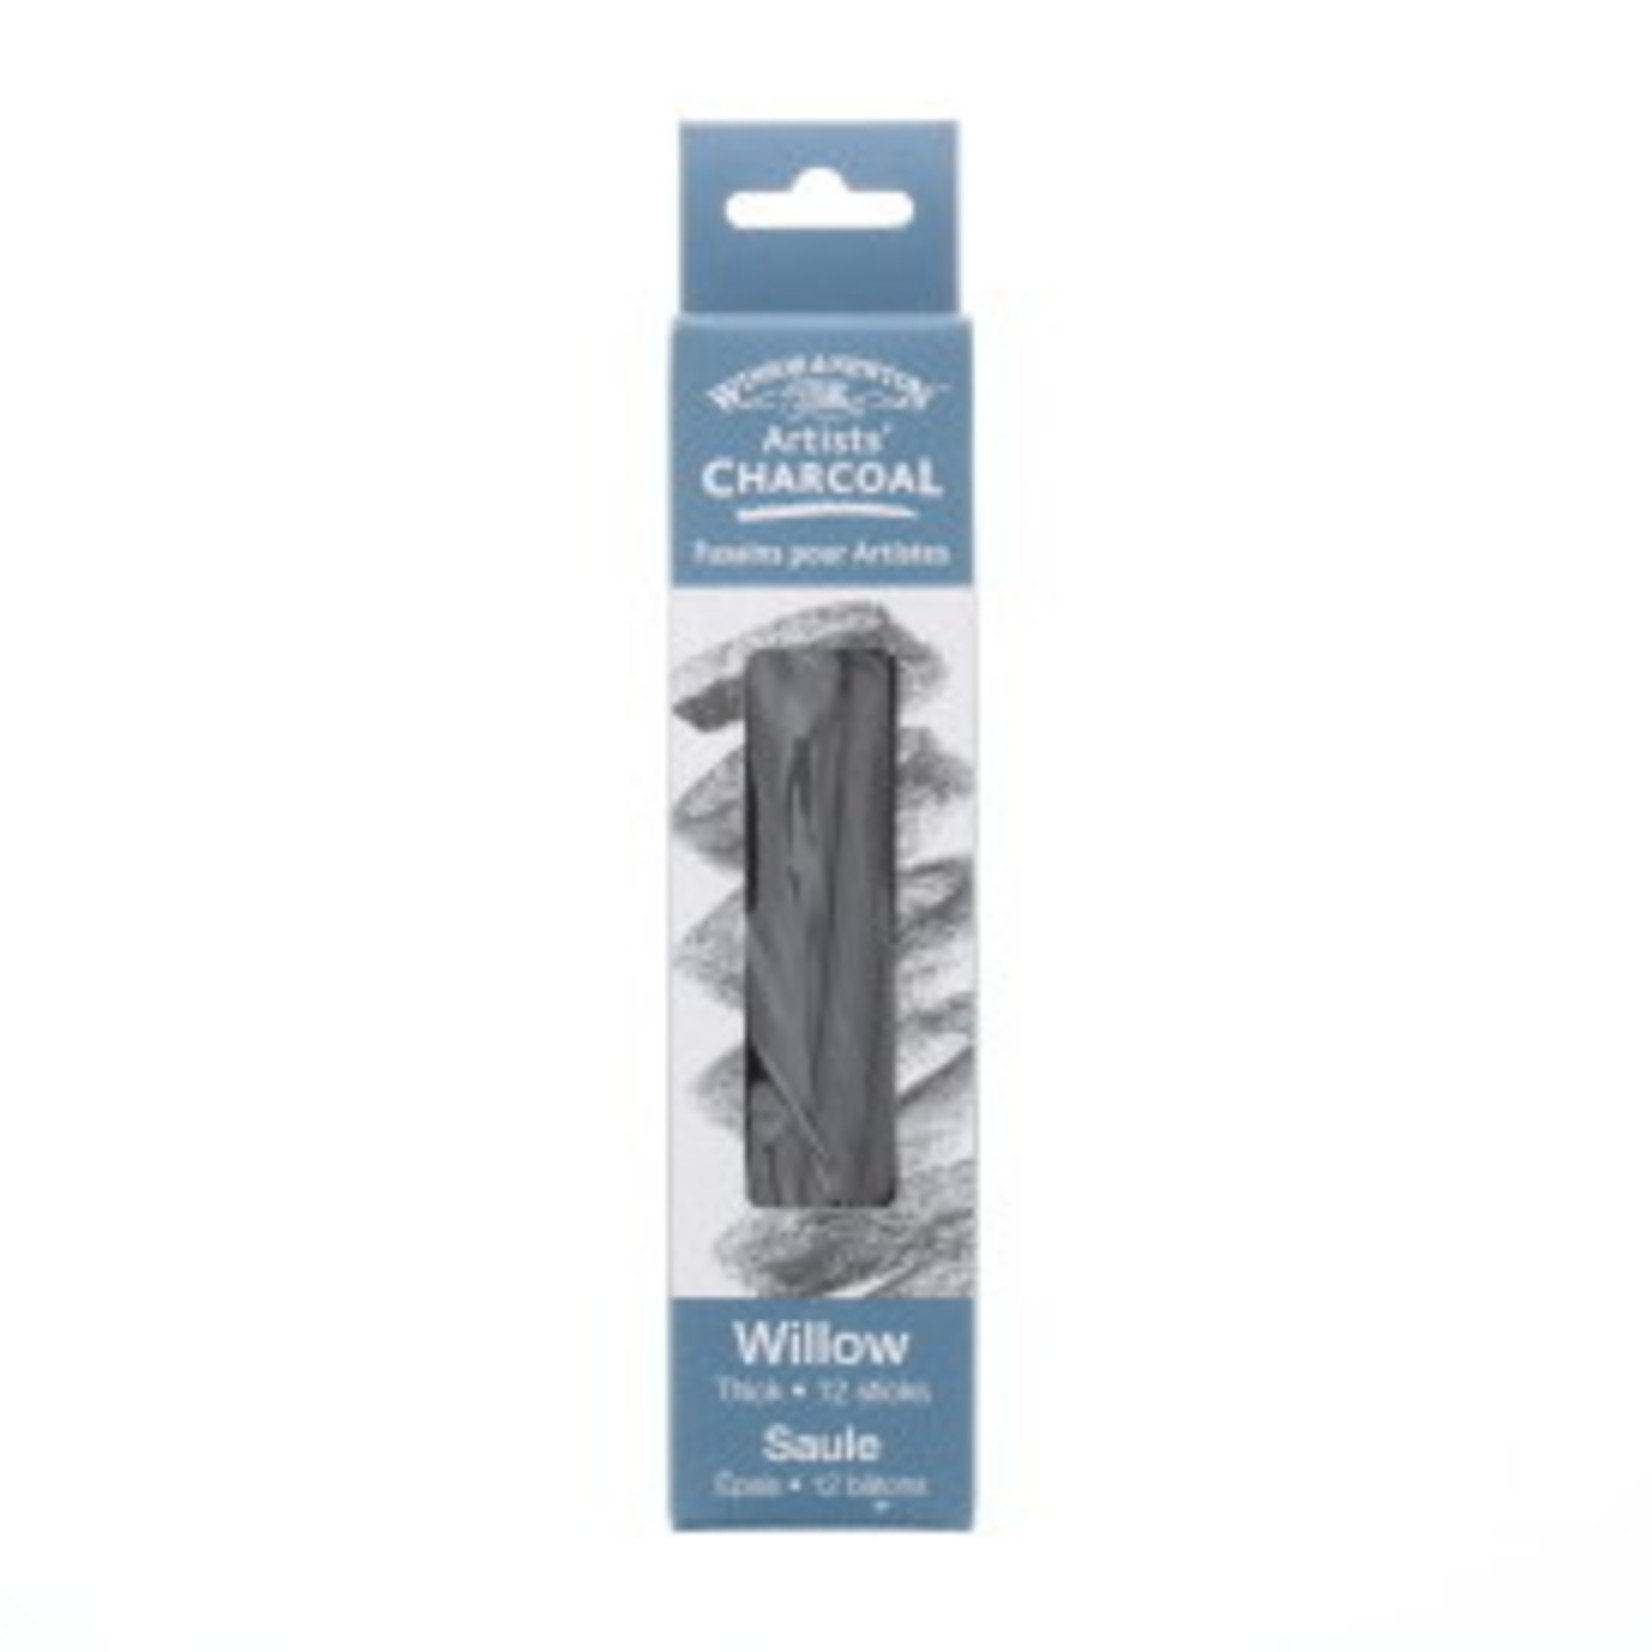 WINSOR & NEWTON CHARCOAL THICK WILLOW 12/PK